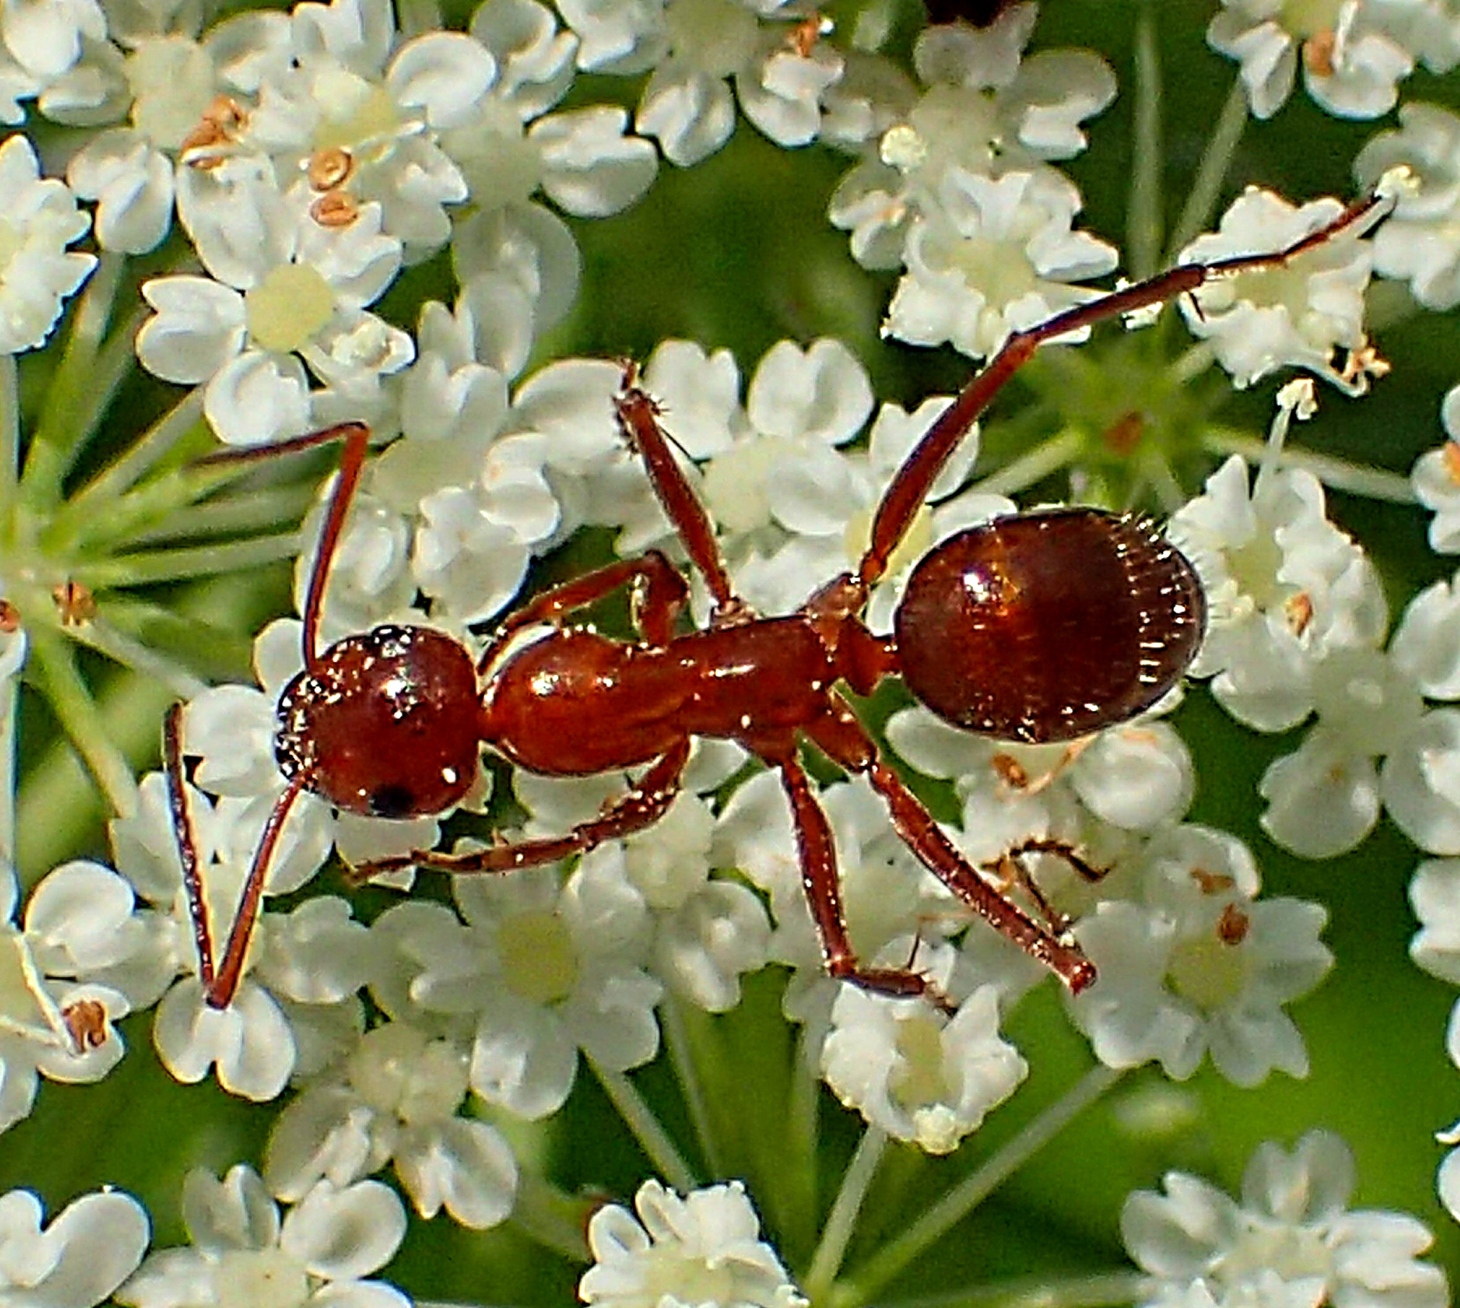 Ant on Queen Ann's Lace (2). Photo by Thomas Peace 2014